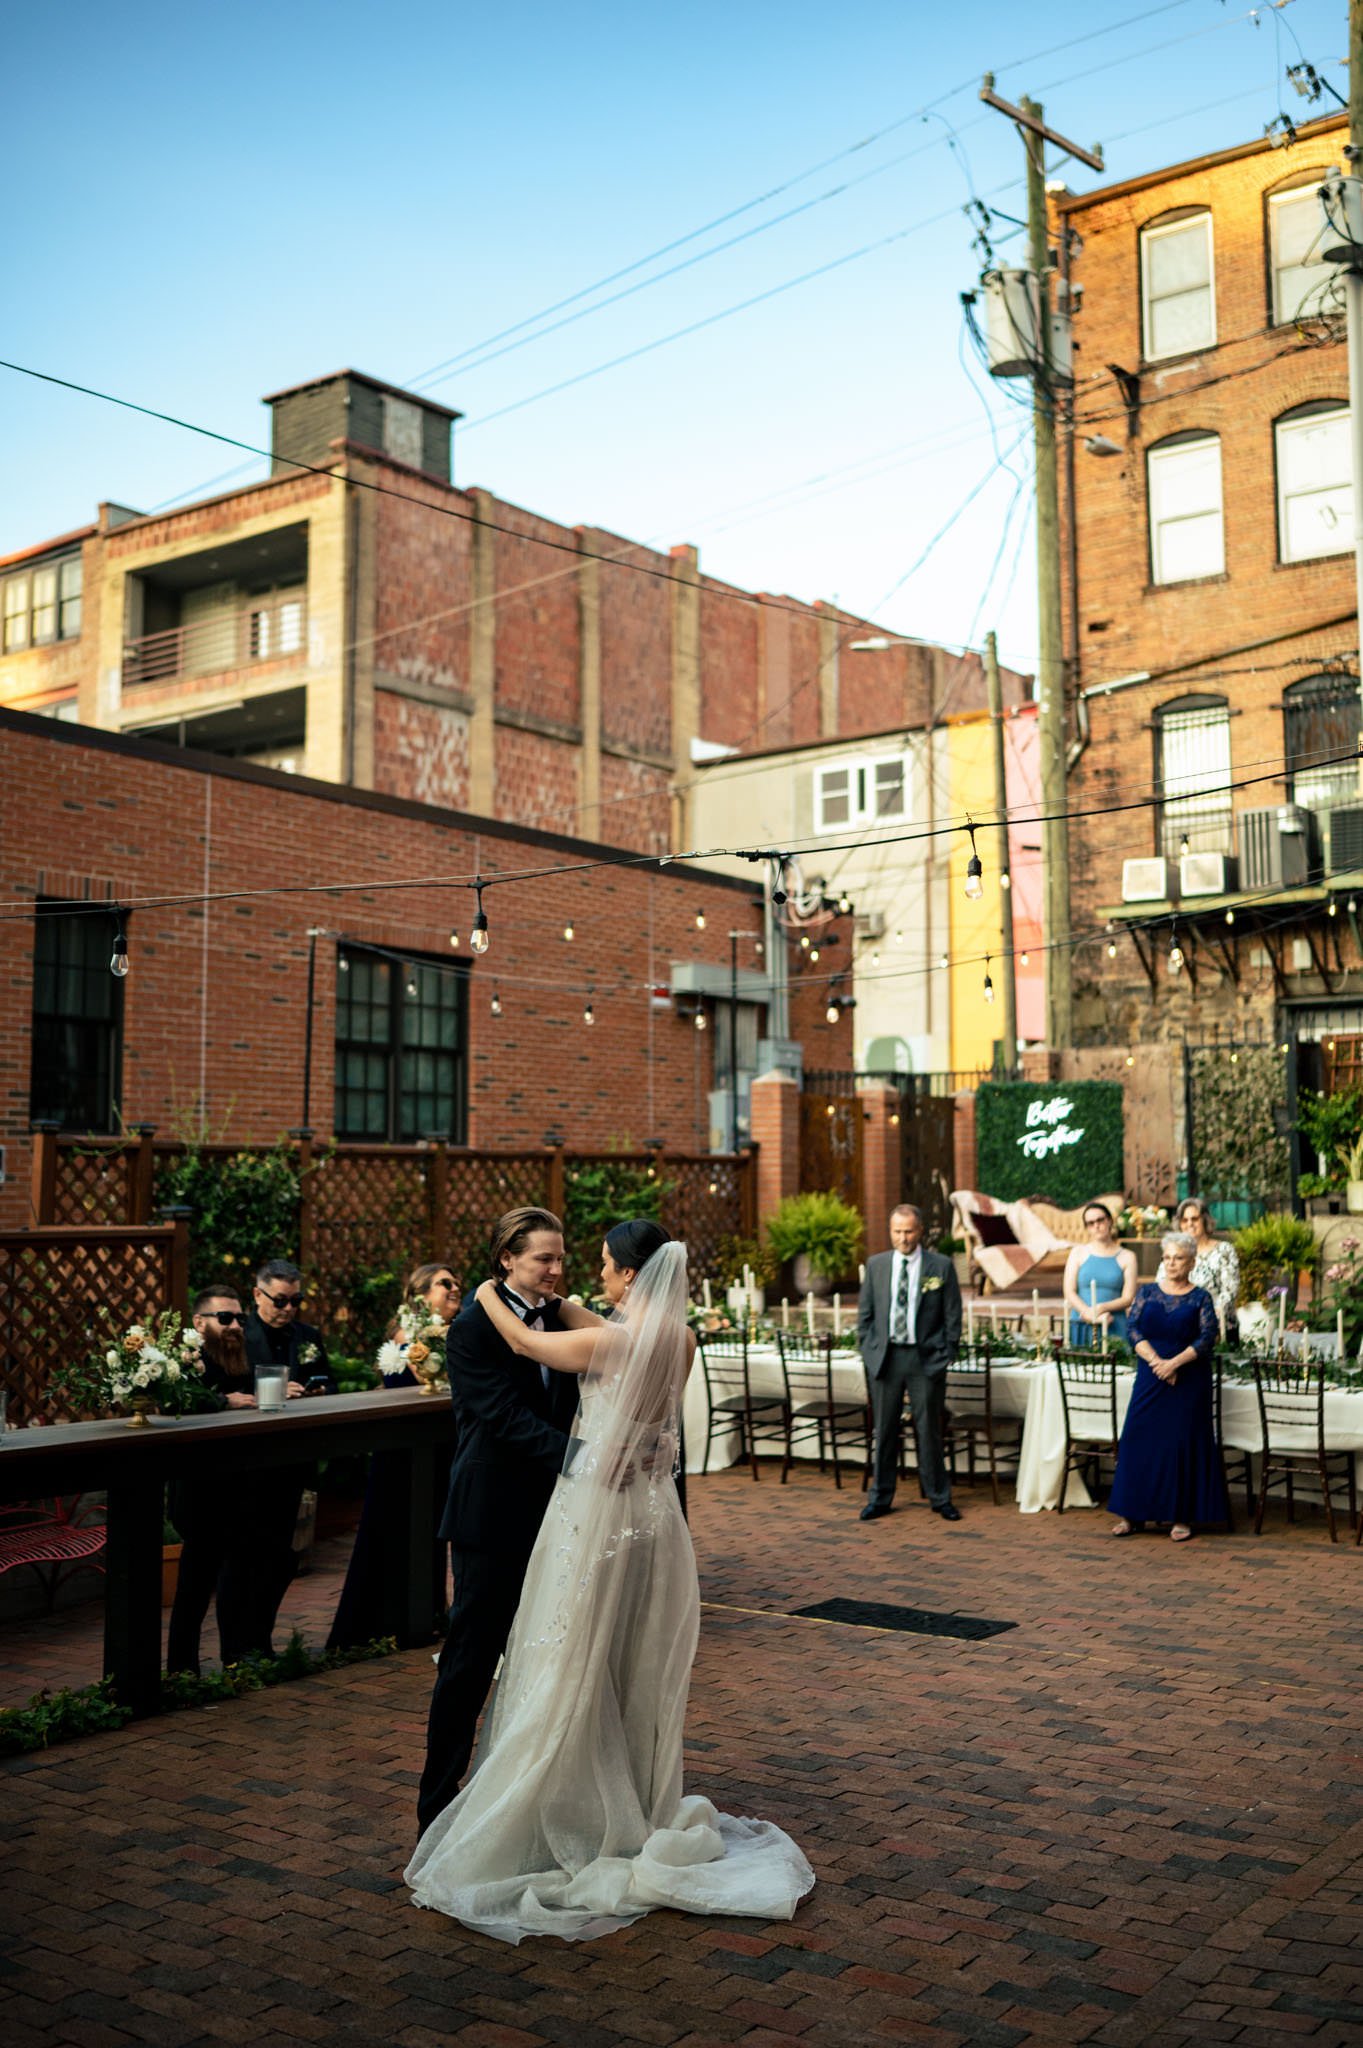 A bride and groom sharing their first dance at an Asheville micro wedding.